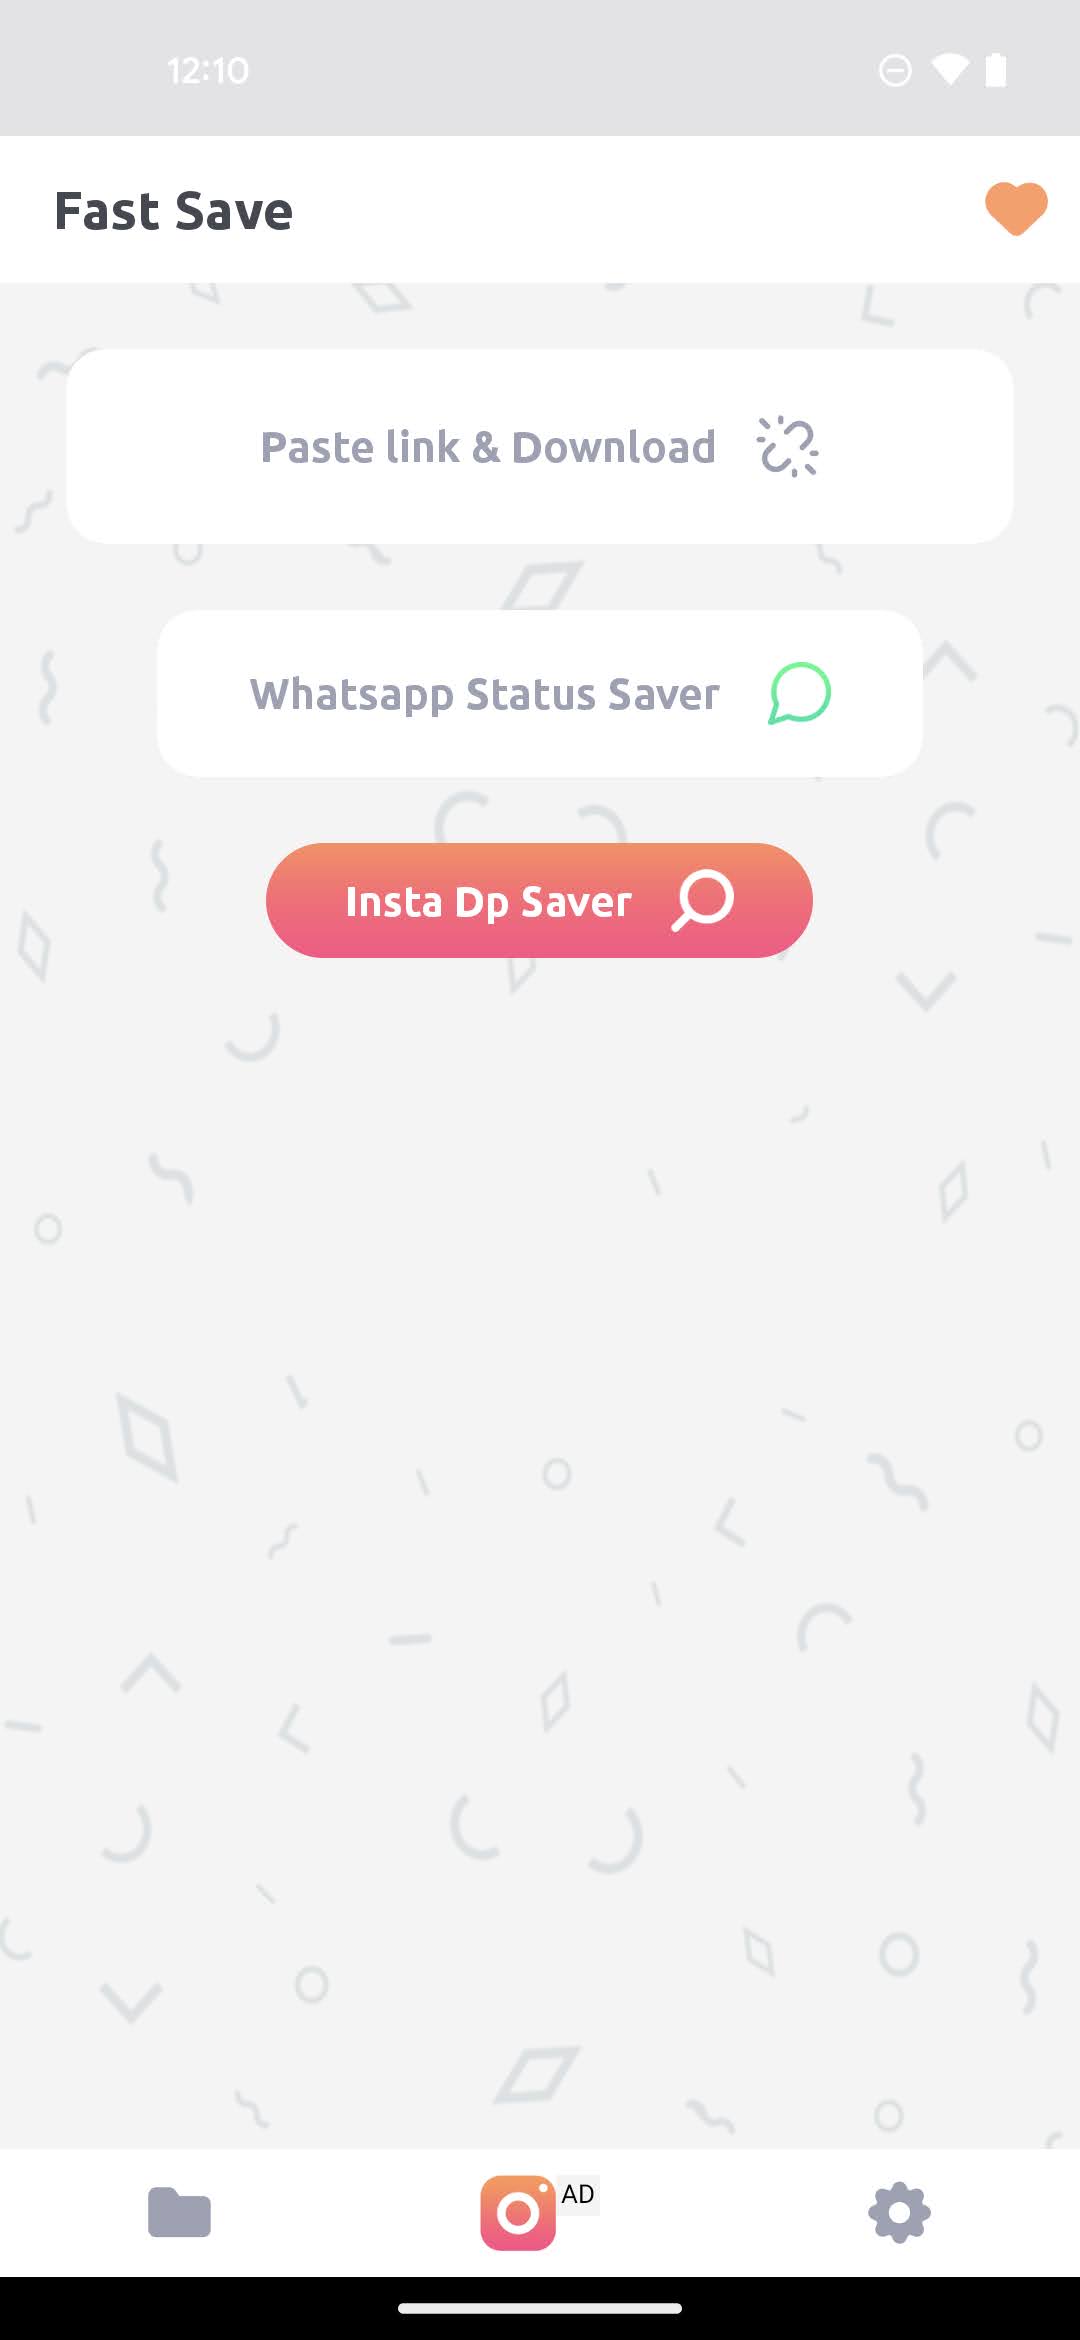 How to use Fast Save for Instagram 2